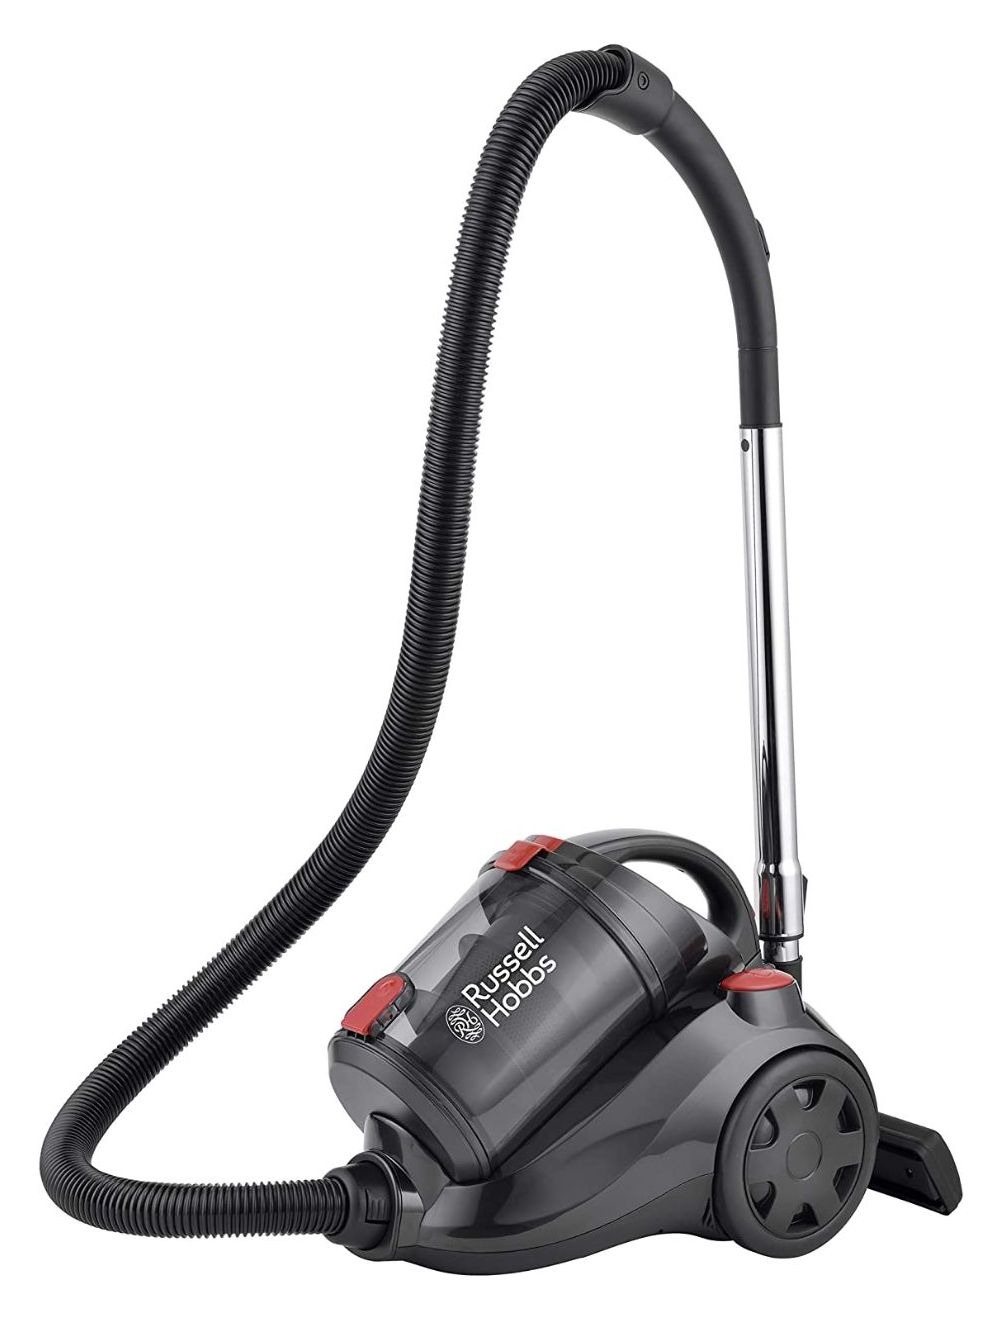 Russell Hobbs Cyclonic Power Vacuum Cleaner, Black, 2.5 Litres-SL152E